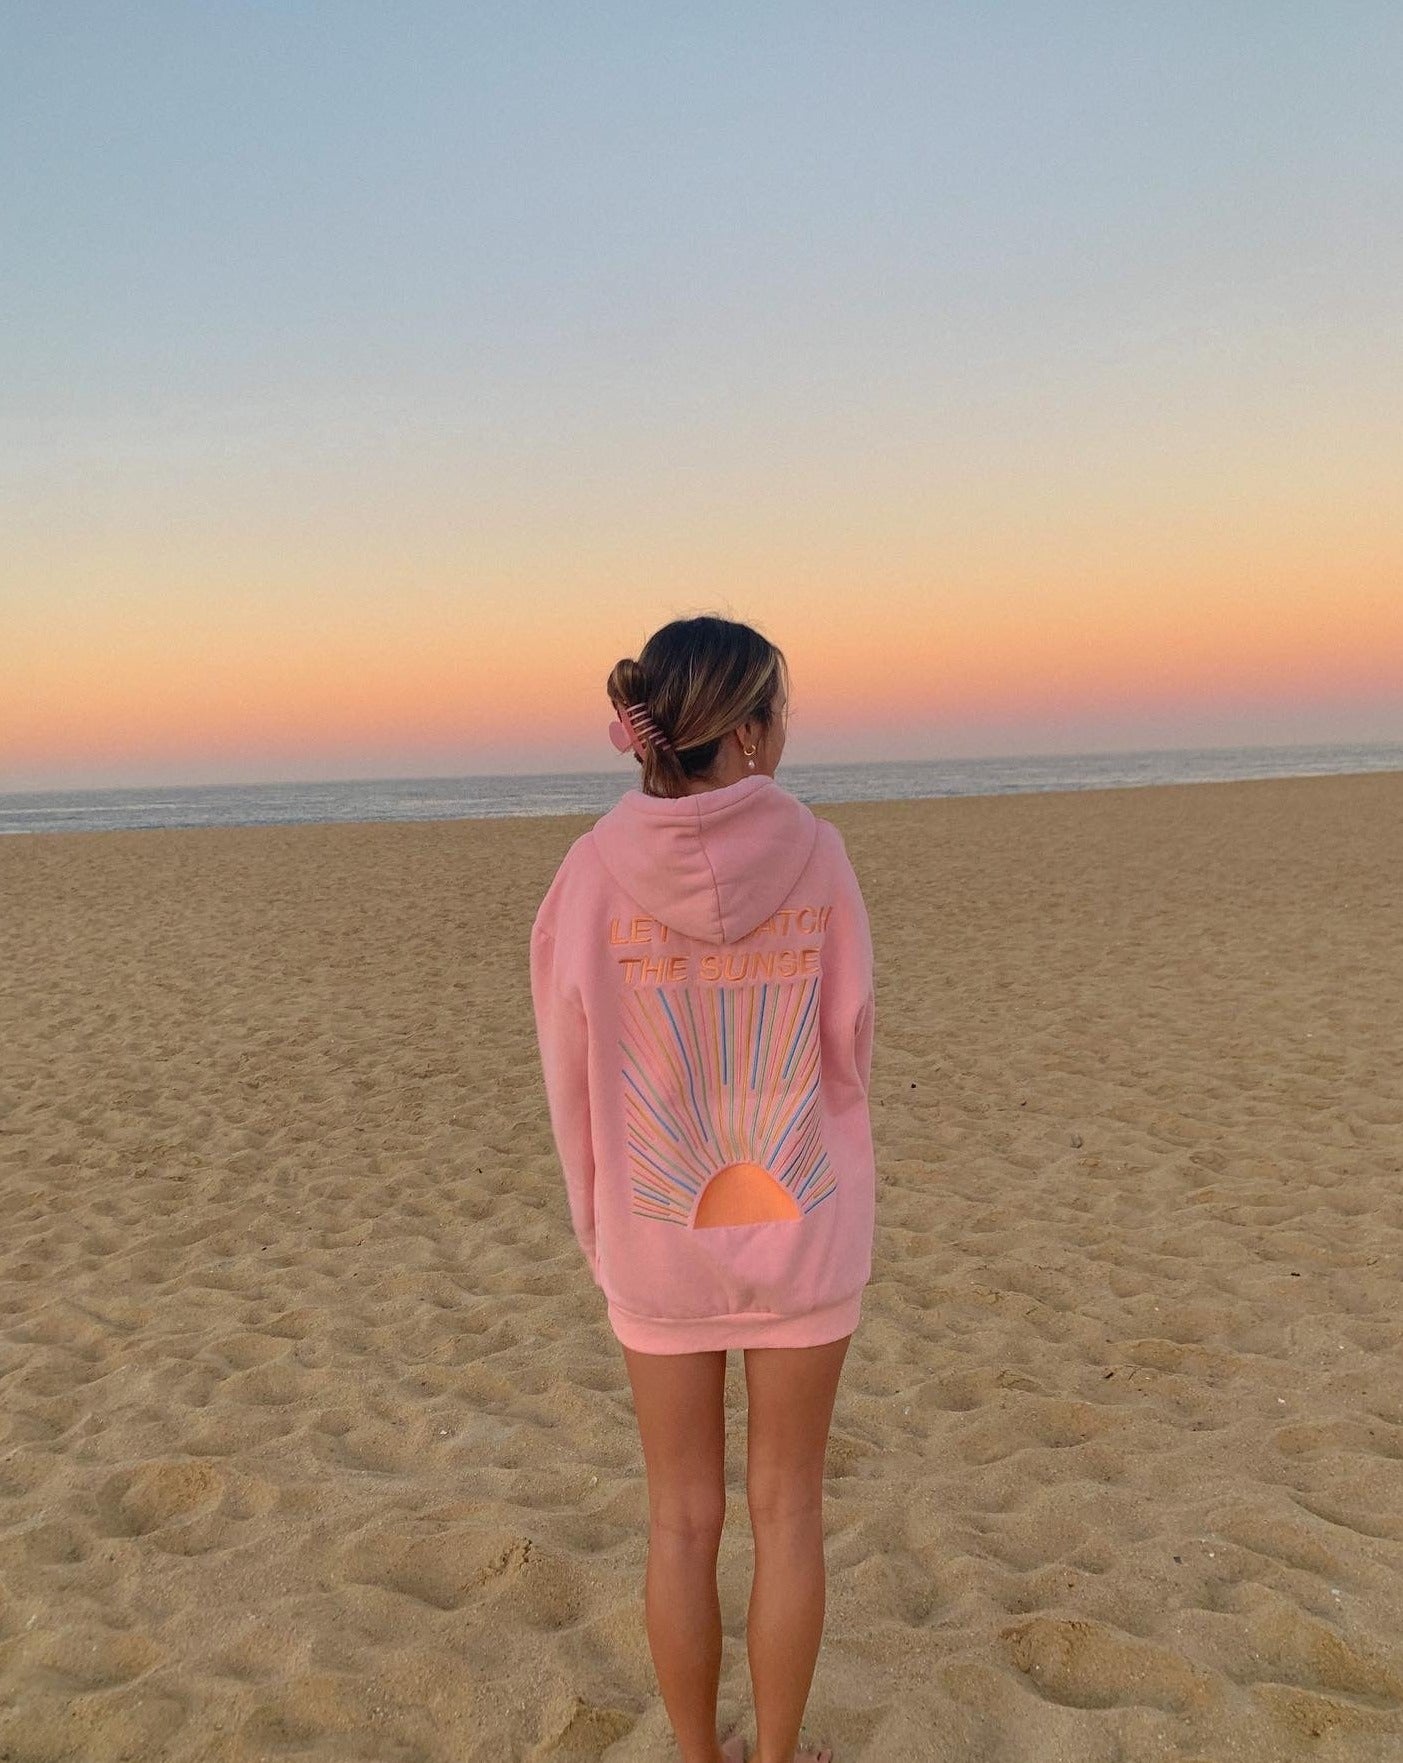 "Let's Watch the Sunset" Embroidered Hoodie in Pink